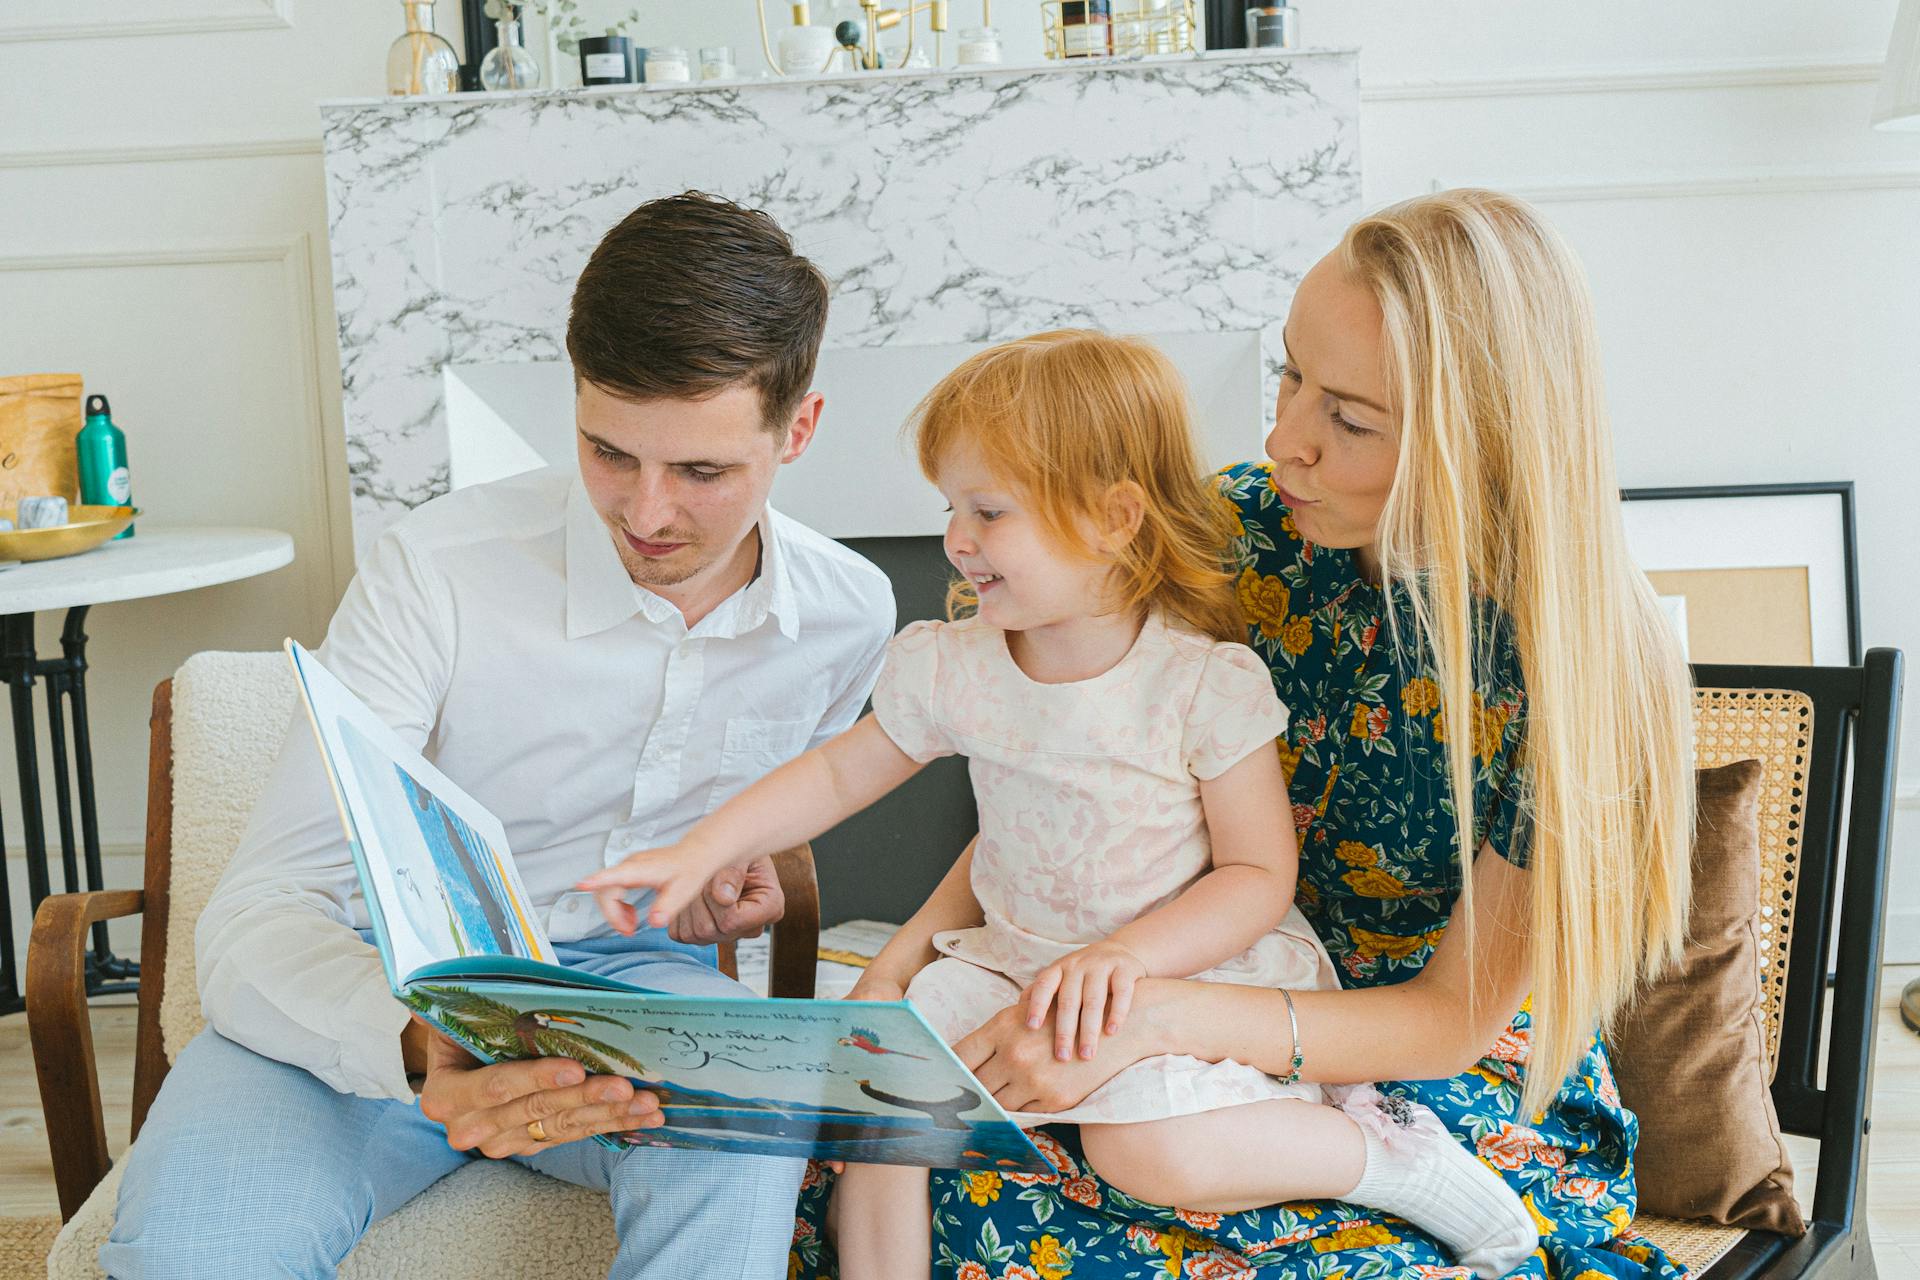 Parents reading a book to their little daughter | Source: Pexels